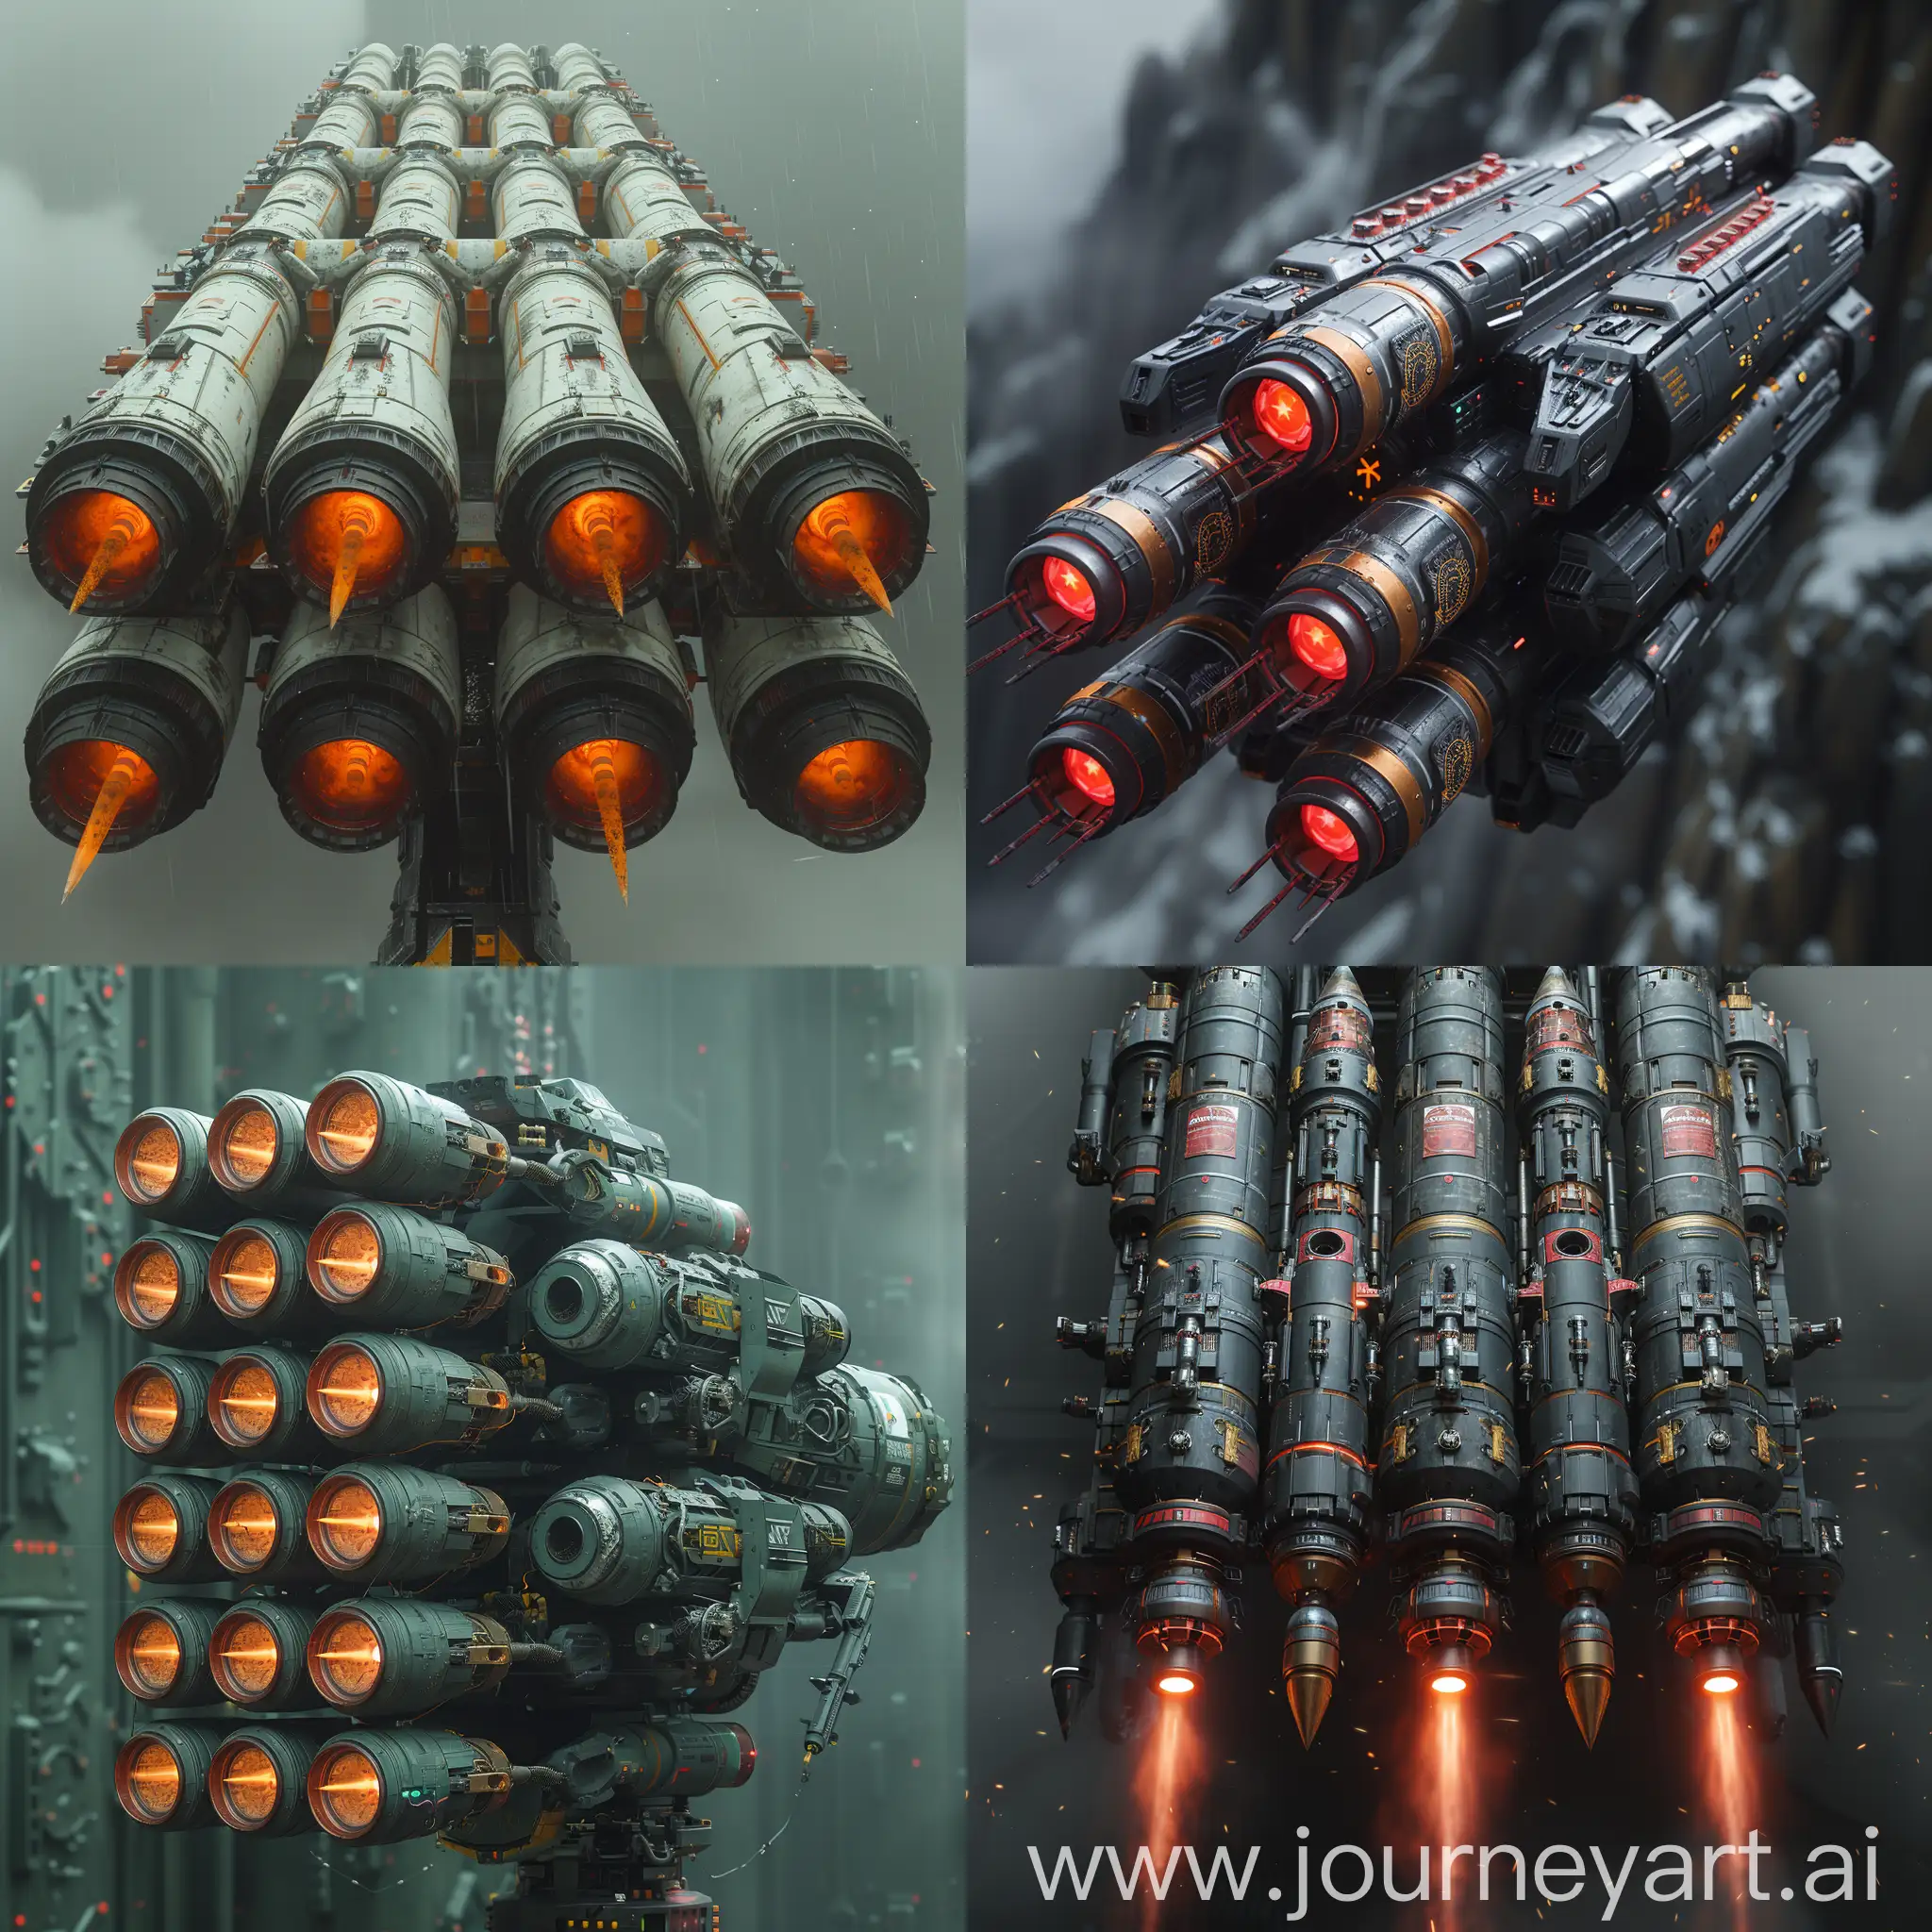 Futuristic-Multiple-Rocket-Launcher-System-with-Advanced-Targeting-and-Stealth-Features